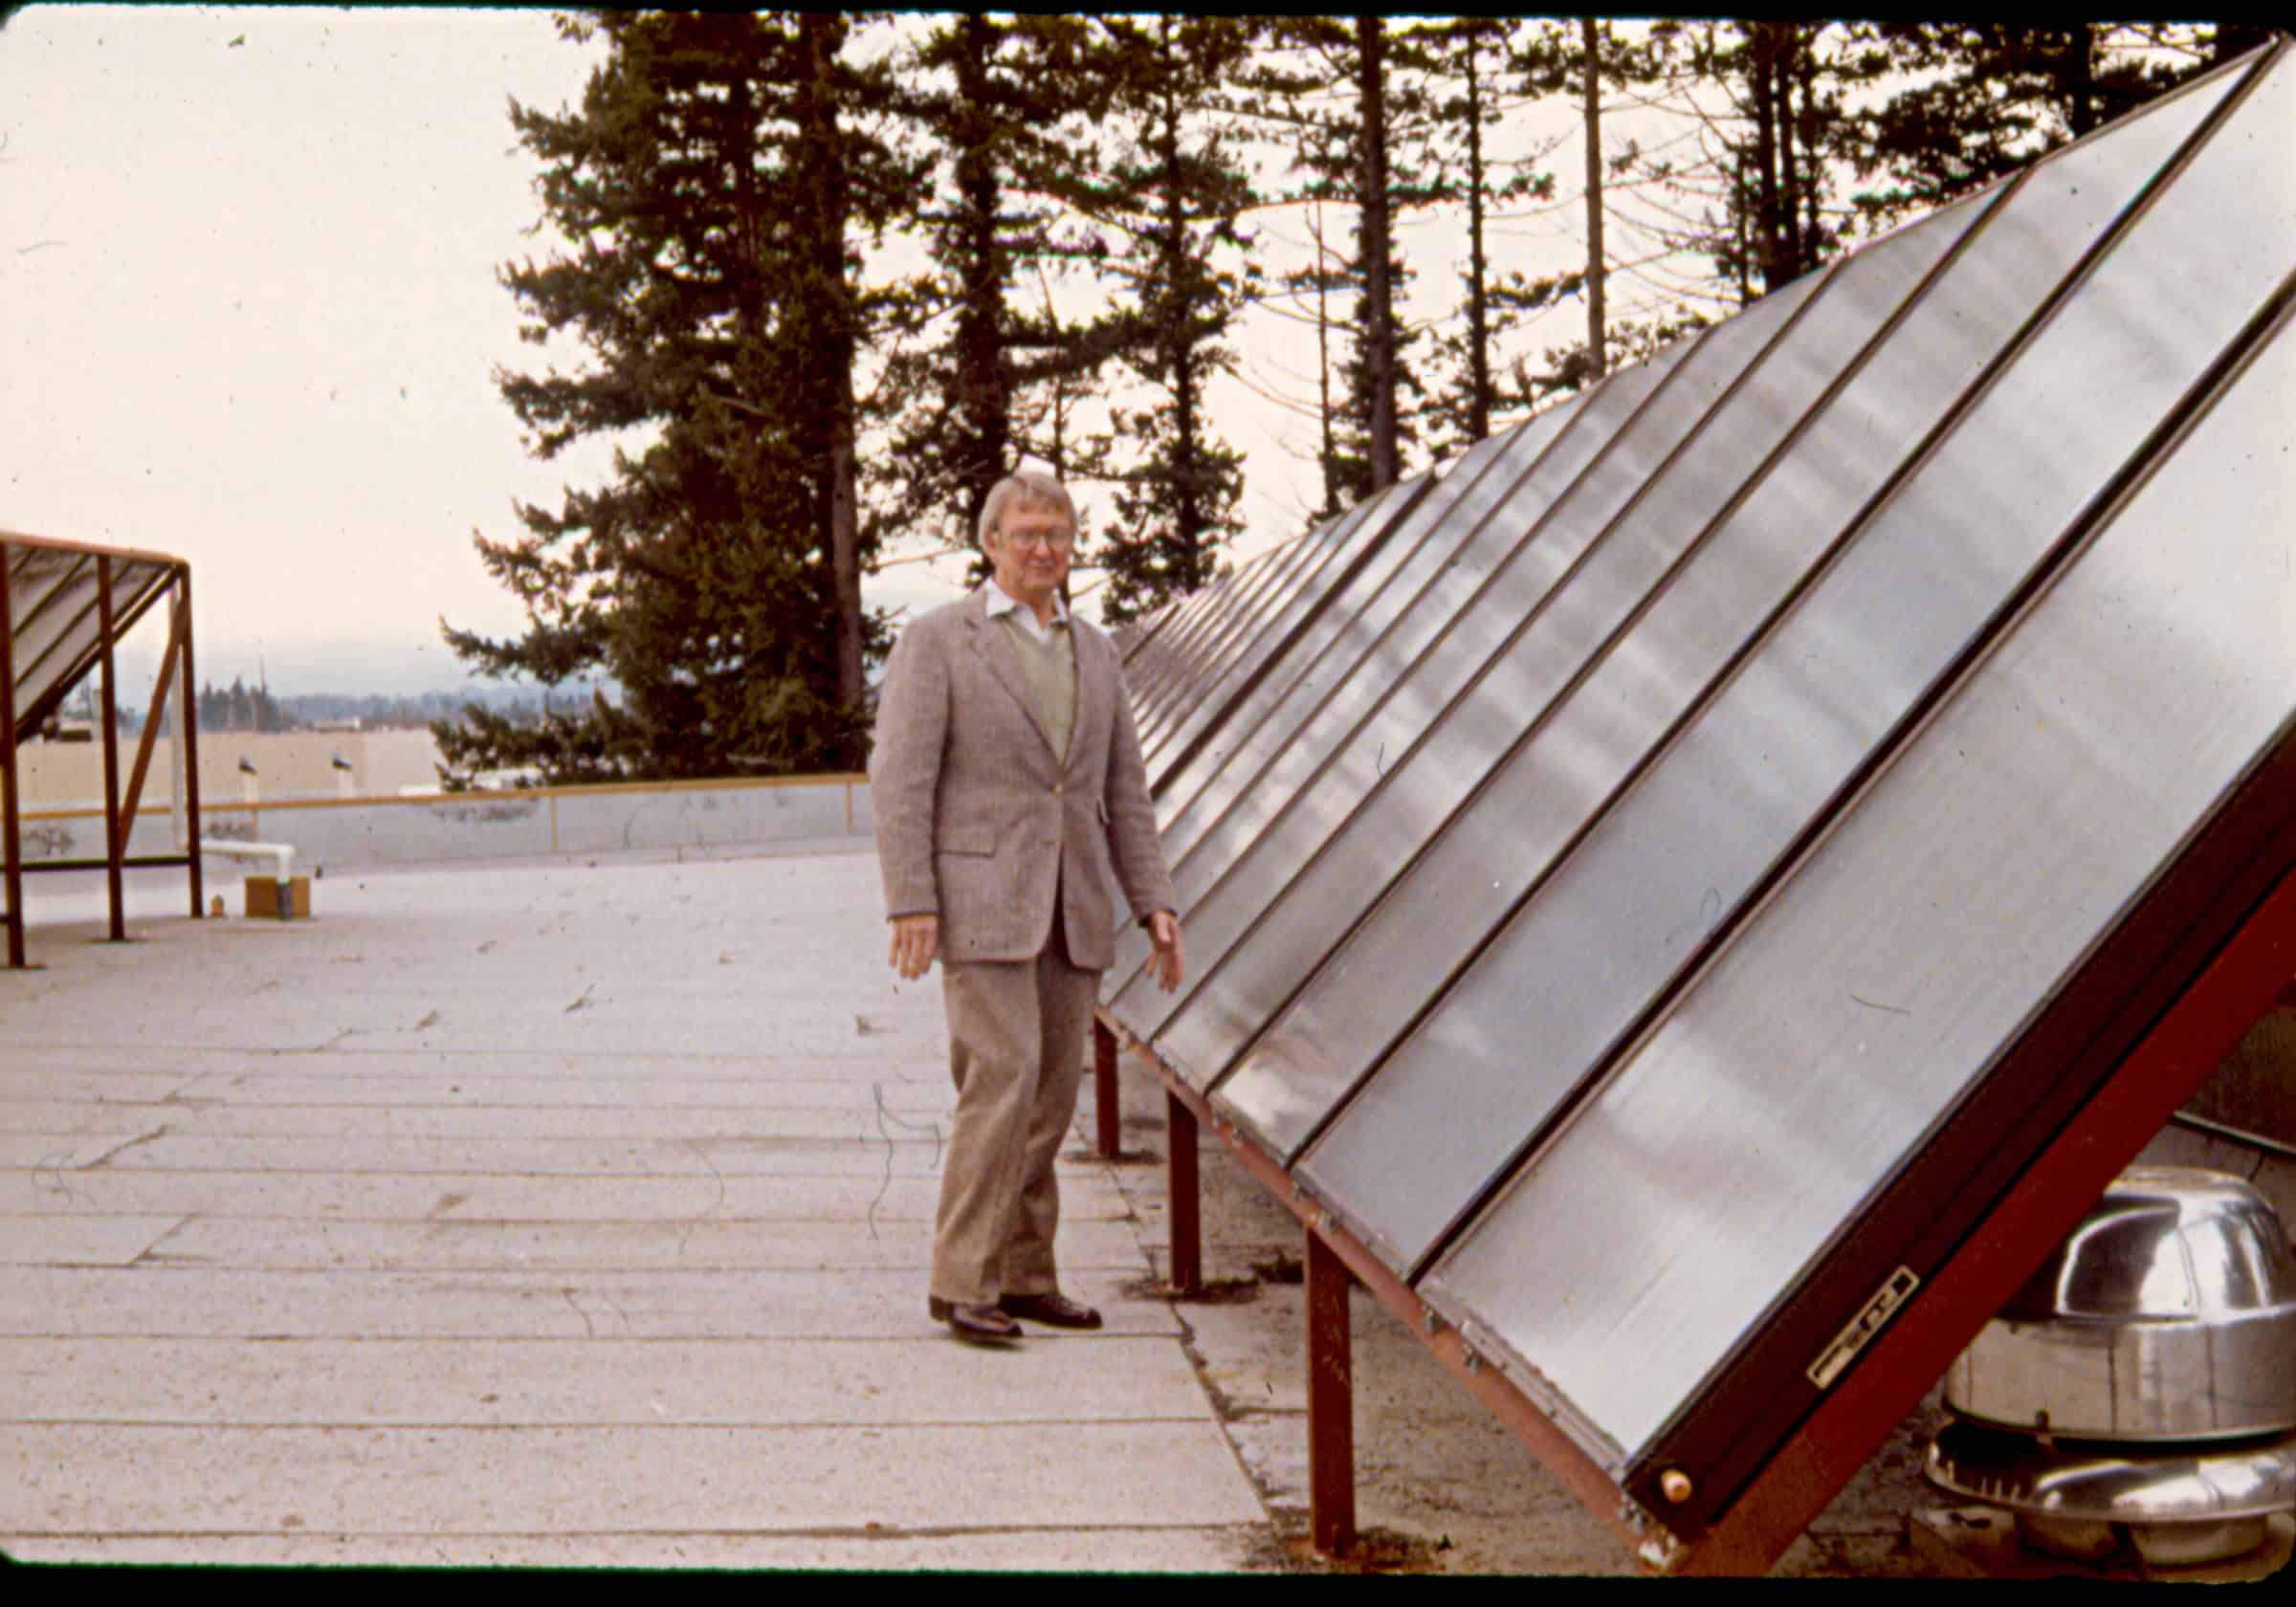 Neil B. Kelly standing next to the latest solar energy technology in the 1980s